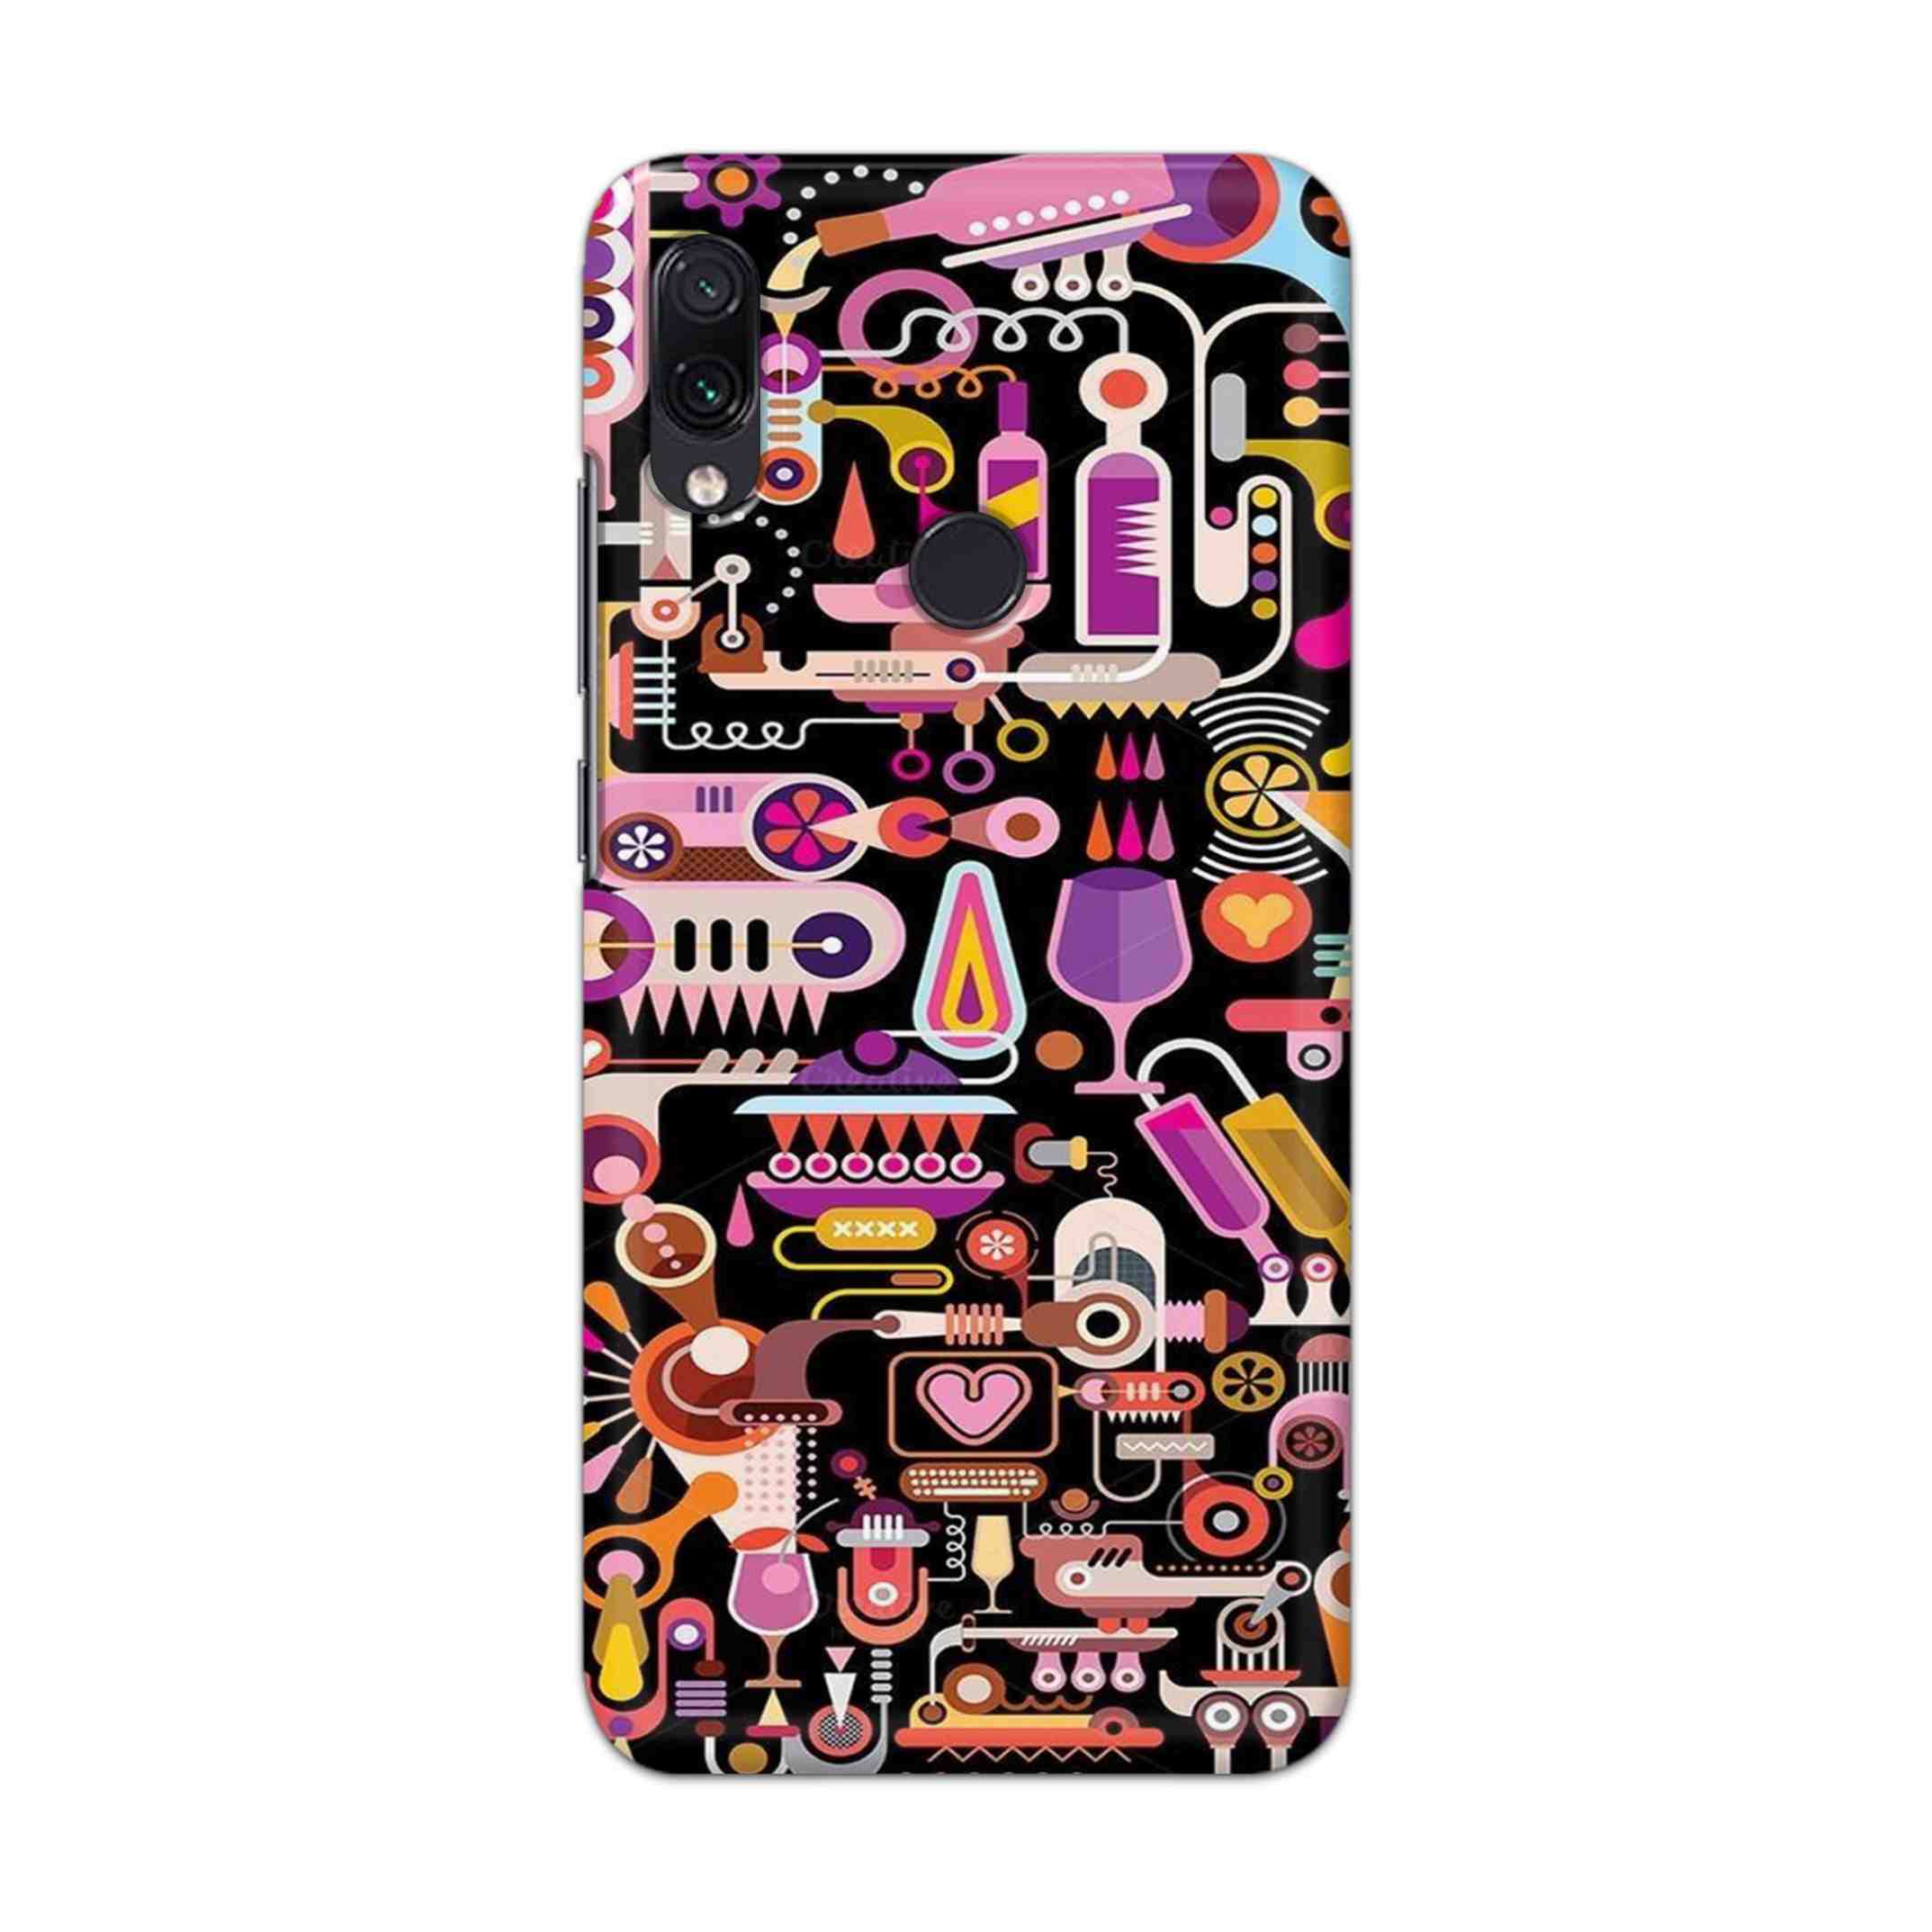 Buy Lab Art Hard Back Mobile Phone Case Cover For Xiaomi Redmi 7 Online